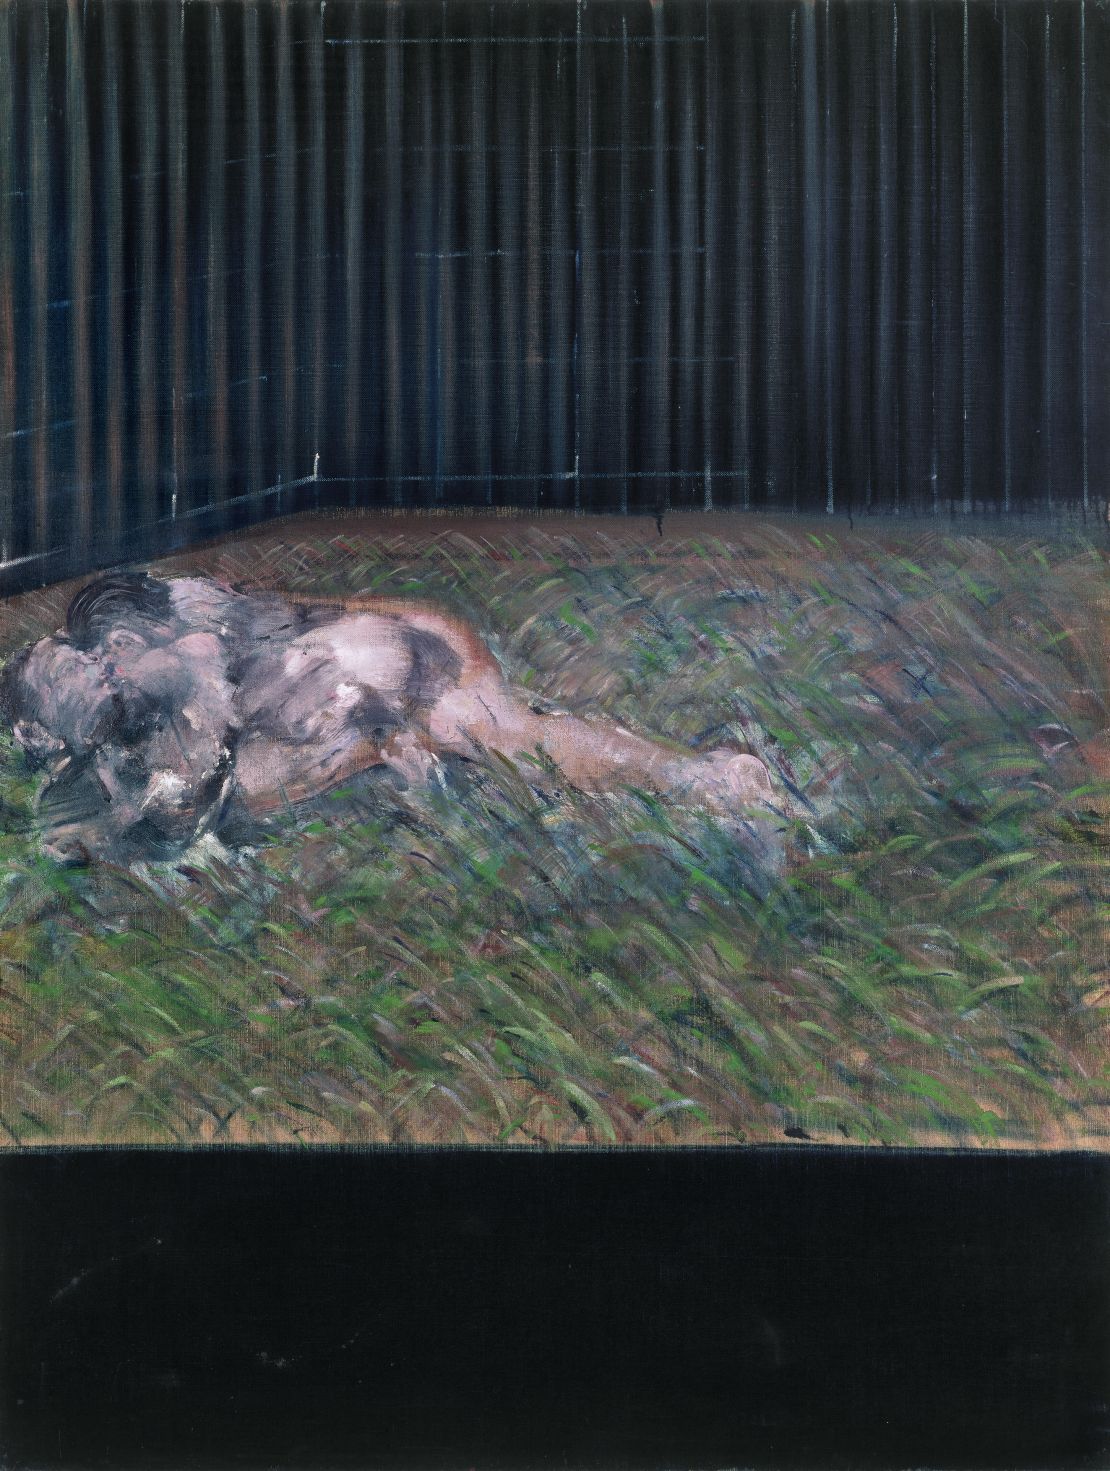 "Two Figures in the Grass" (1954) by Francis Bacon.